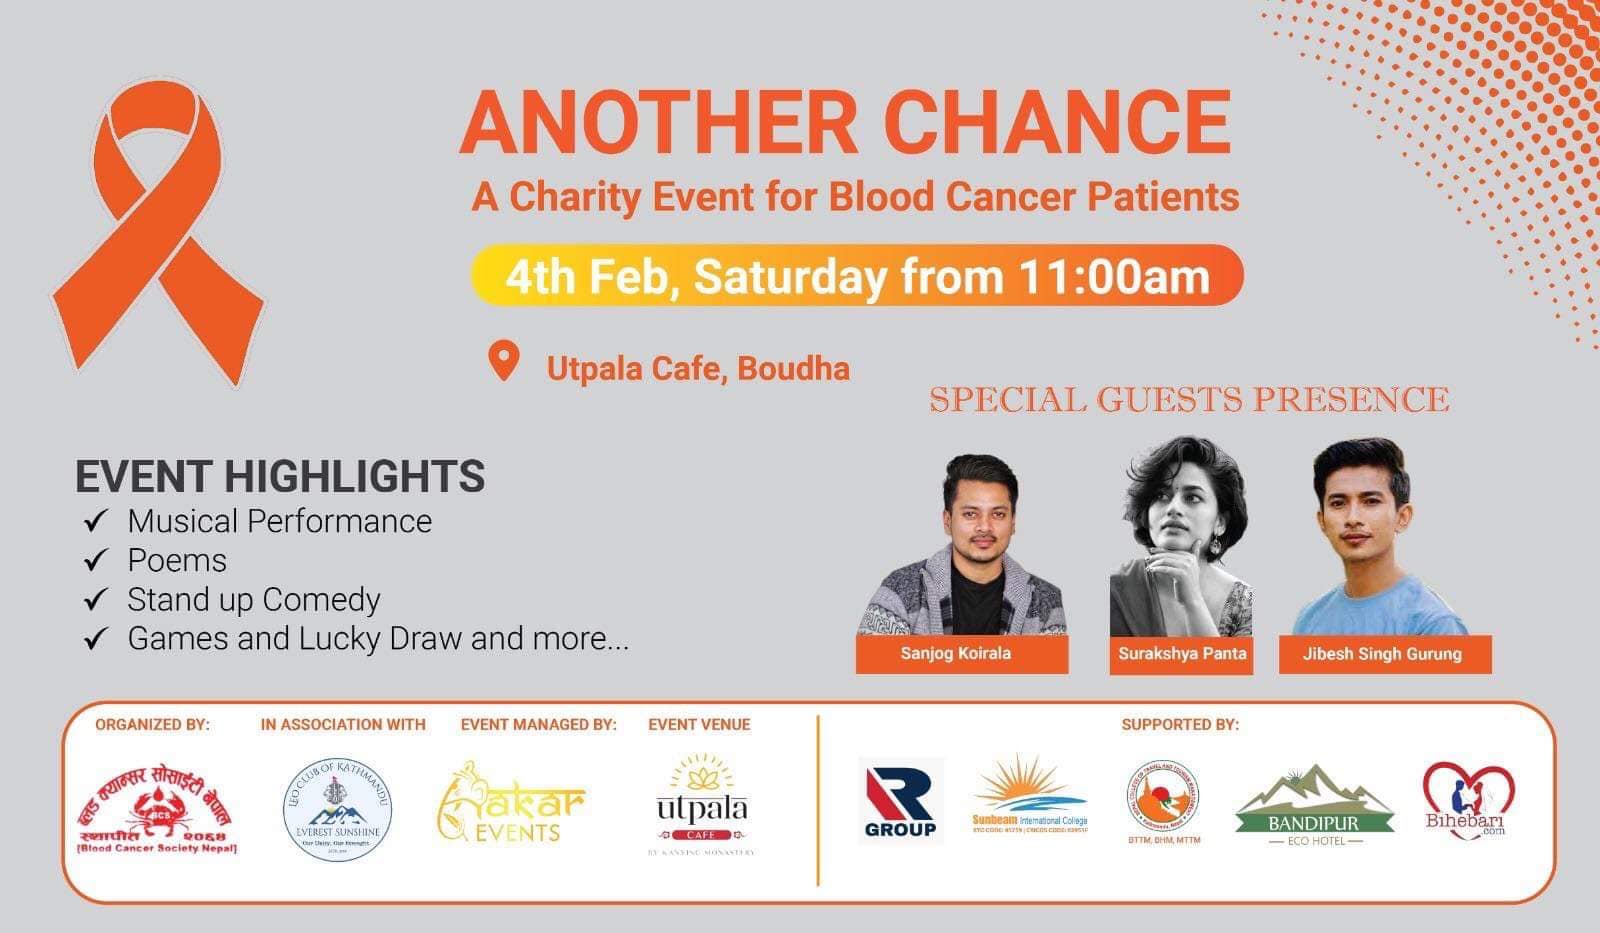 Blood Cancer Society Nepal conducts charity event for blood cancer patients on Cancer Day